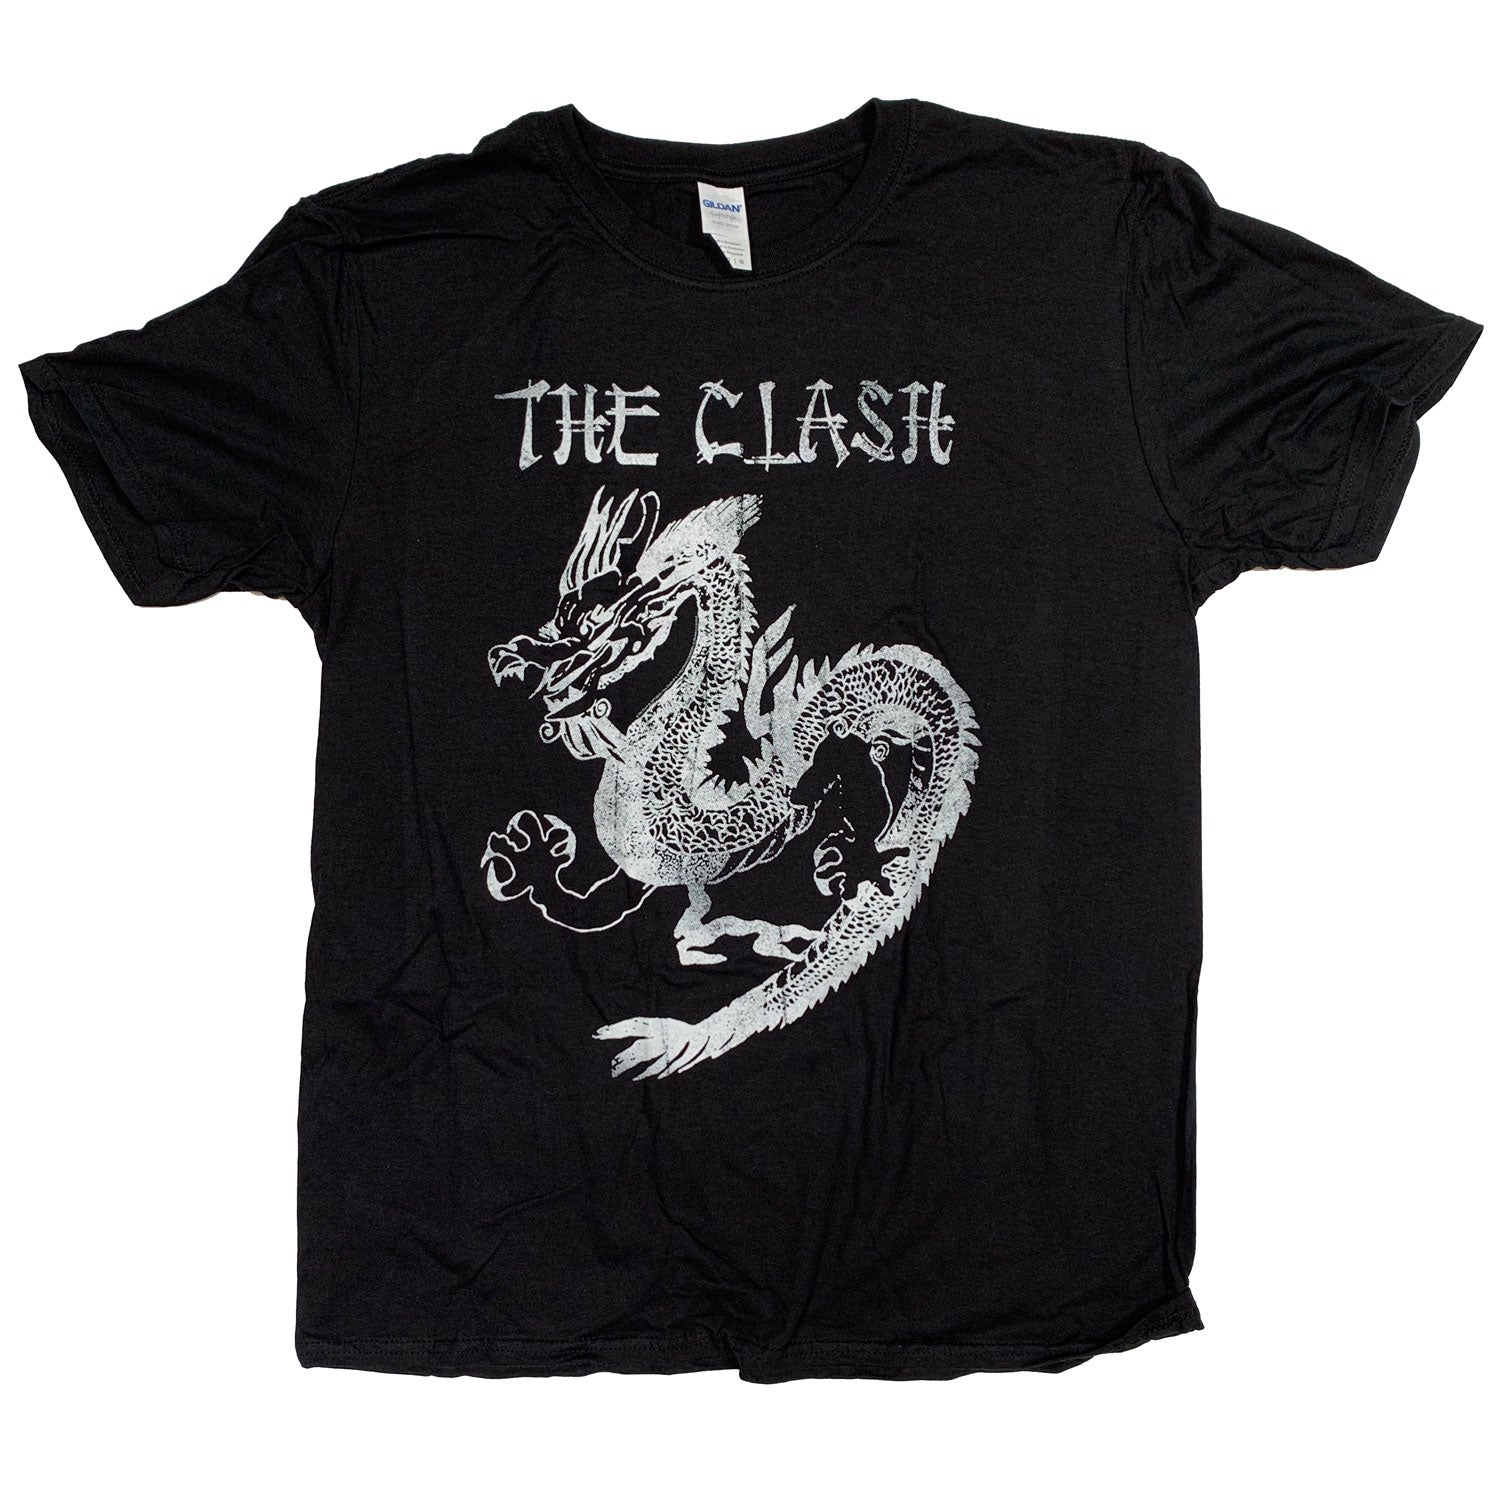 The Clash T Shirt - China Rocks Tattoo Dragon 100% Officially Licensed Classic Punk